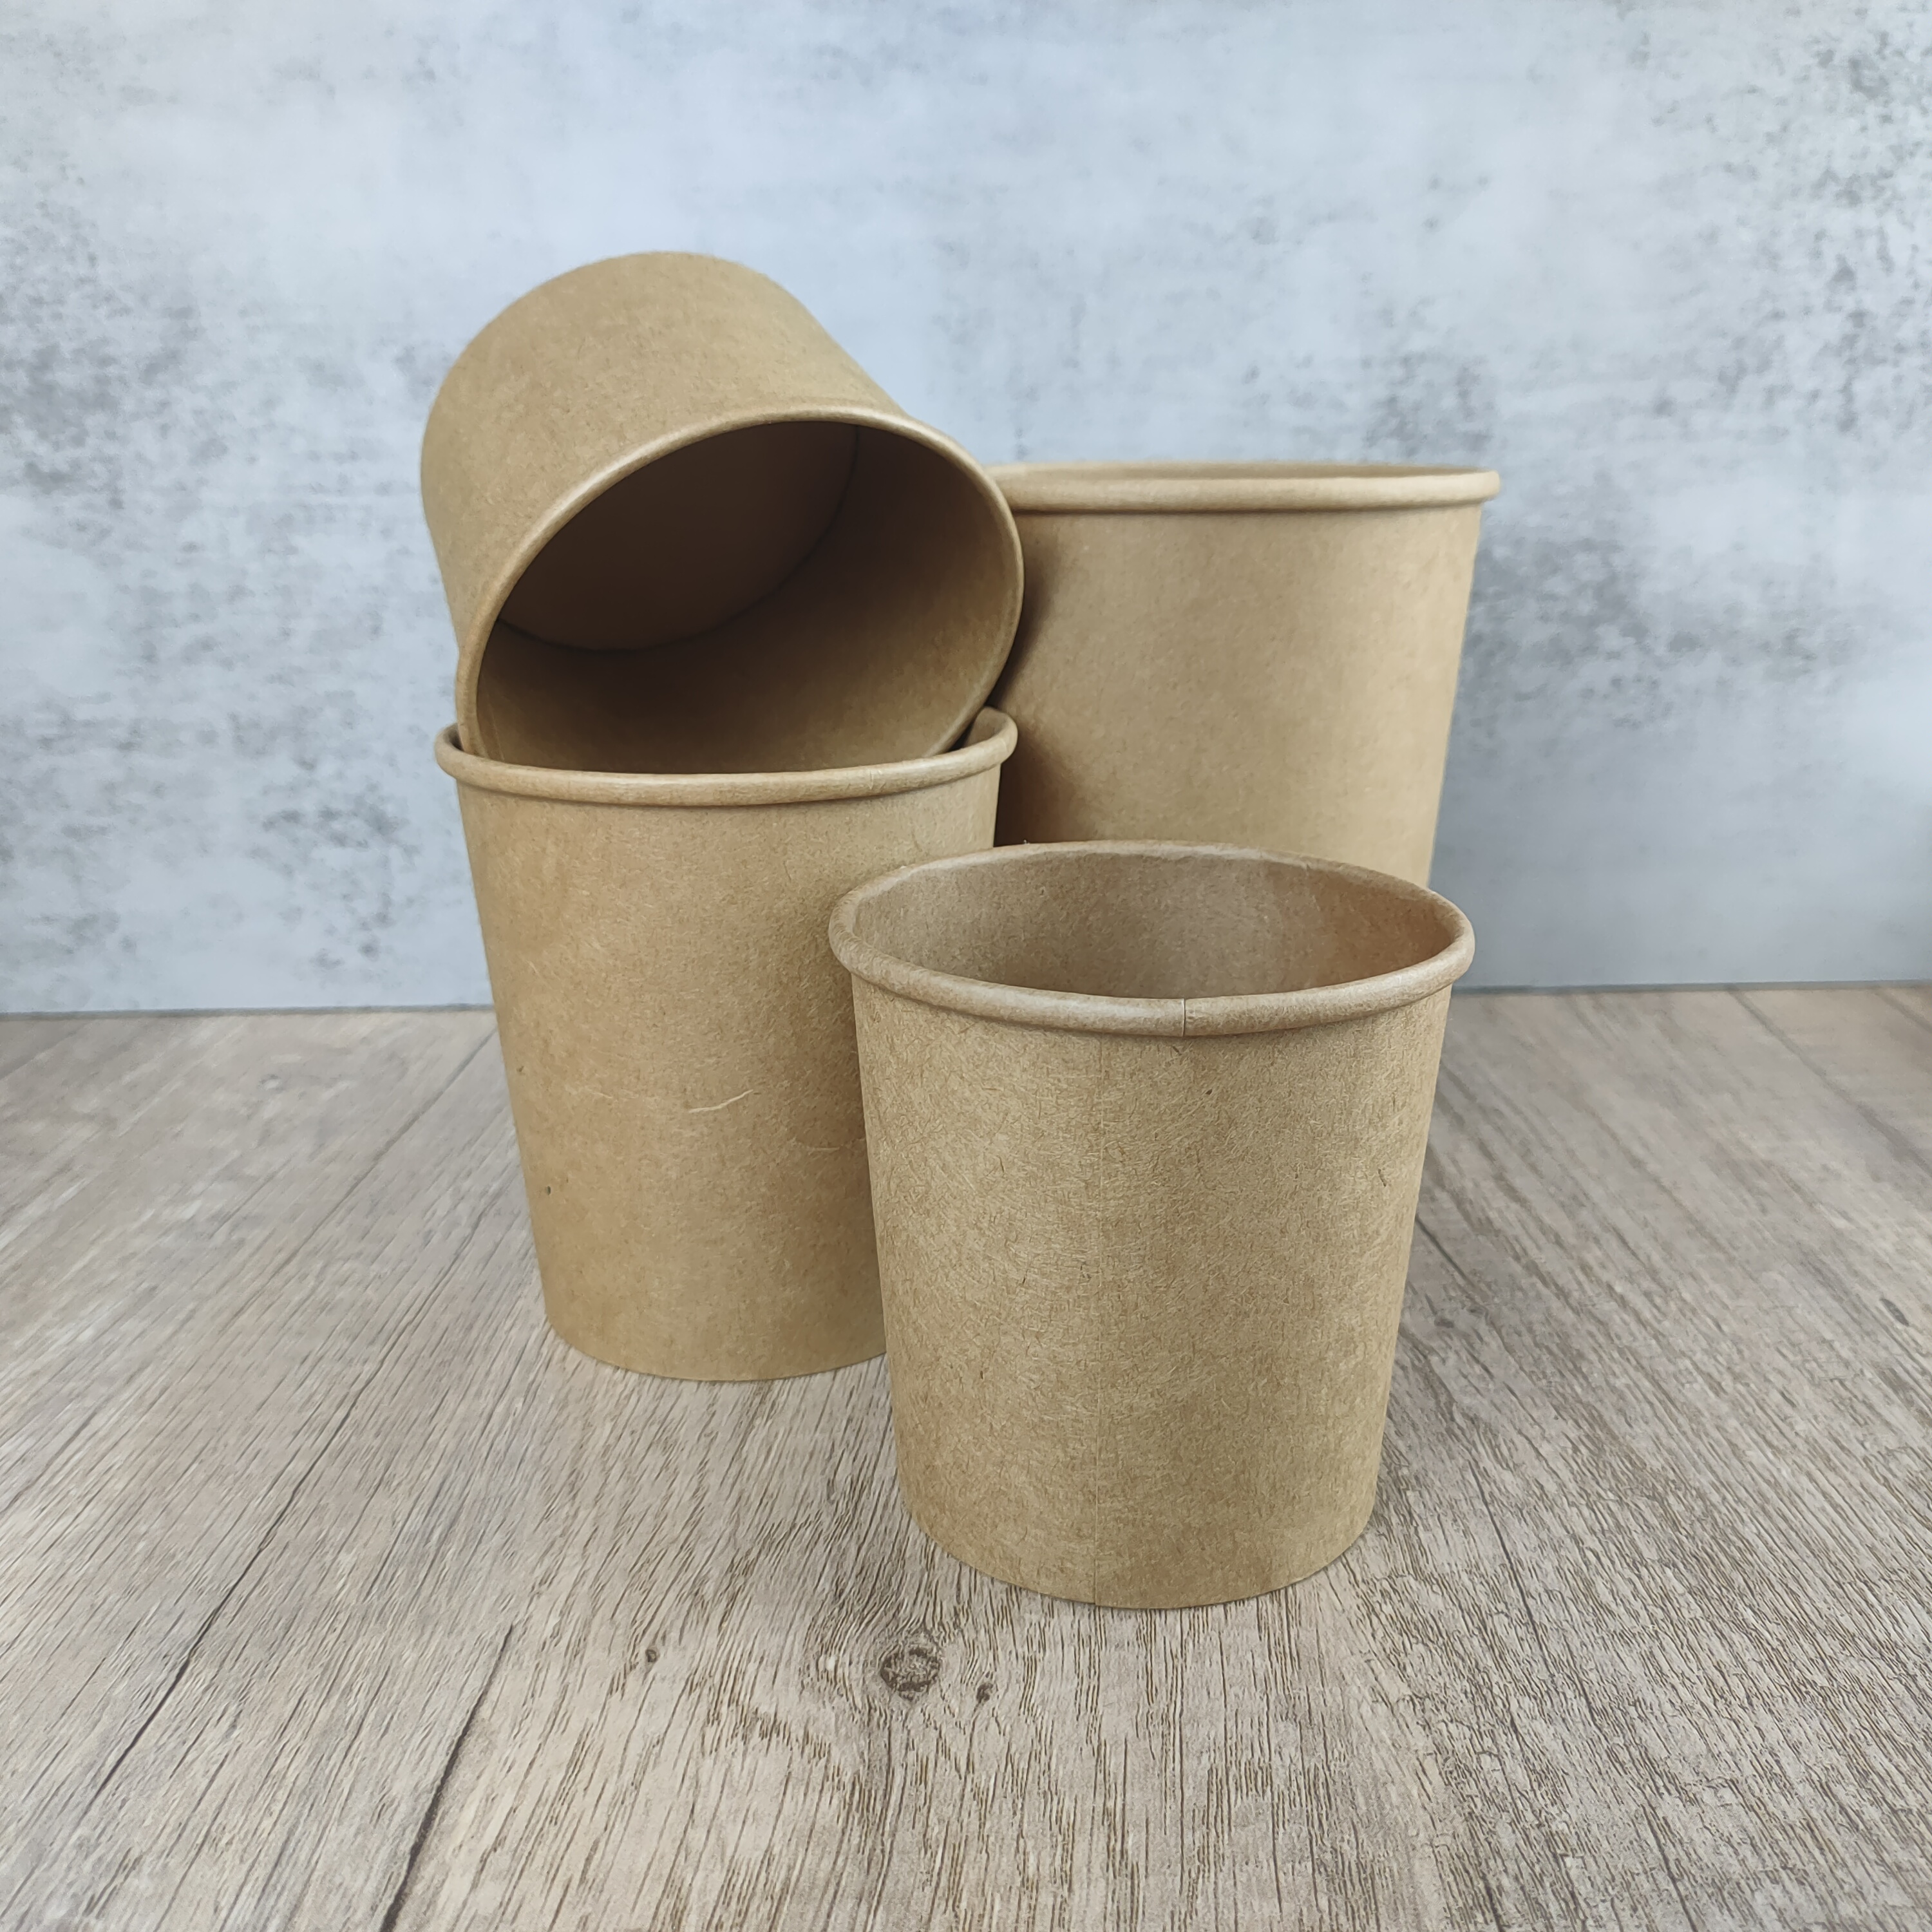 1000ml/32oz Paper Cream Cups Disposable Soup Bowls Brown Dessert Bowls for Hot Or Cold Food Party Supplies Treat Dessert Cups for Frozen Yogurt 